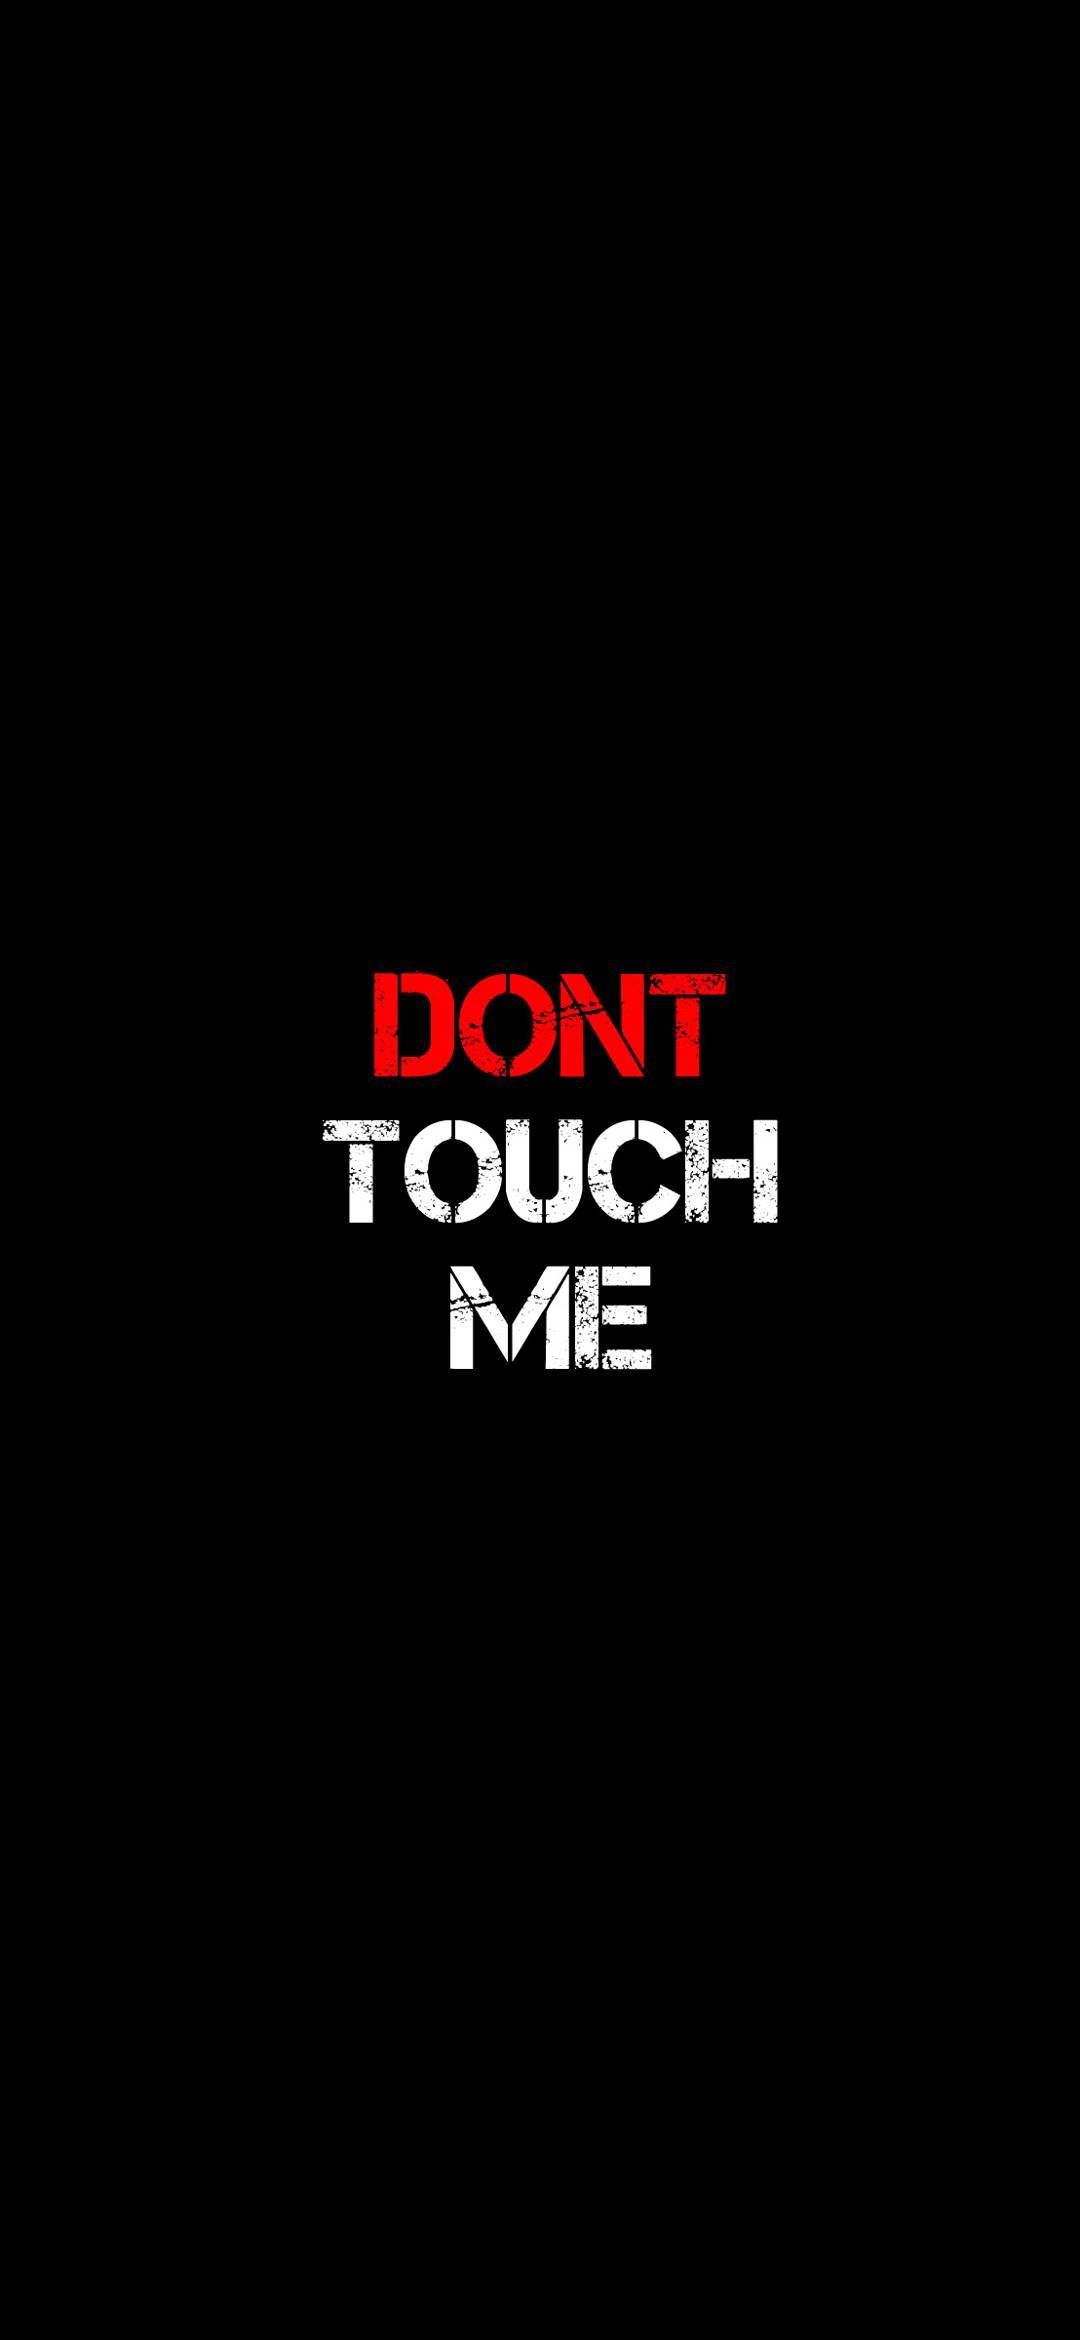 Dont touch me wallpapers